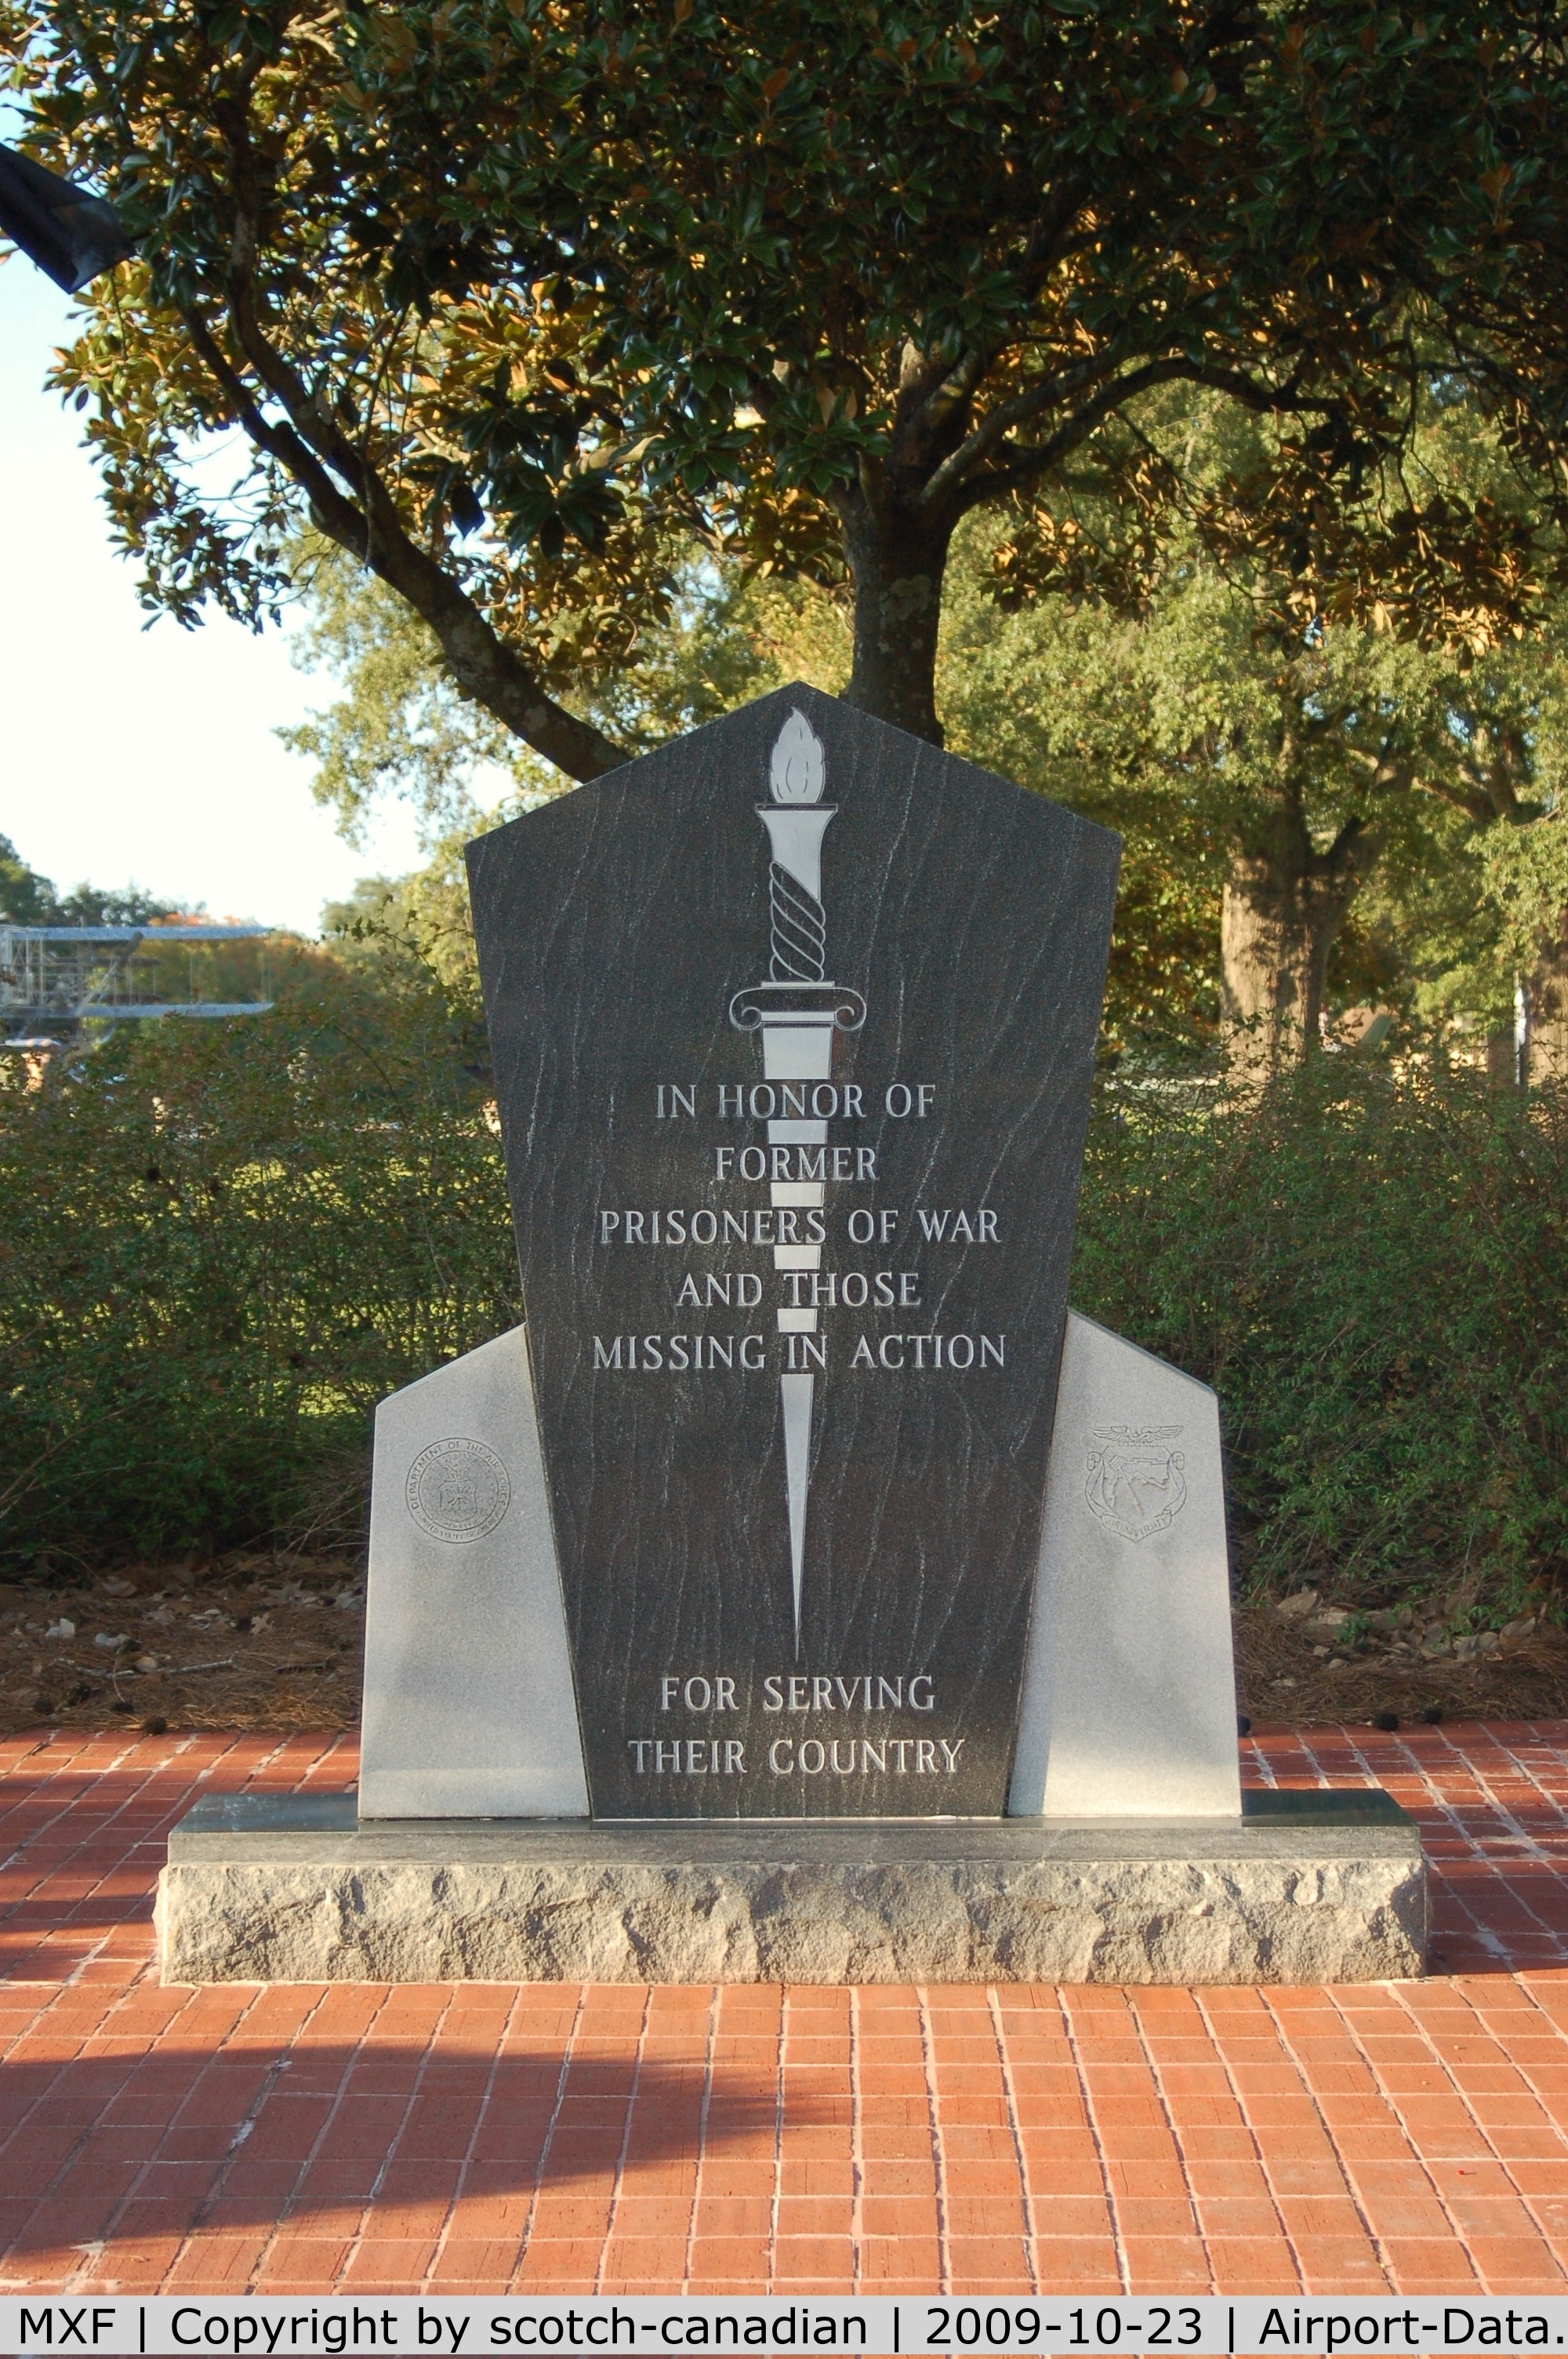 Maxwell Afb Airport (MXF) - Prisoners of War Monument at Maxwell AFB, Montgomery, AL